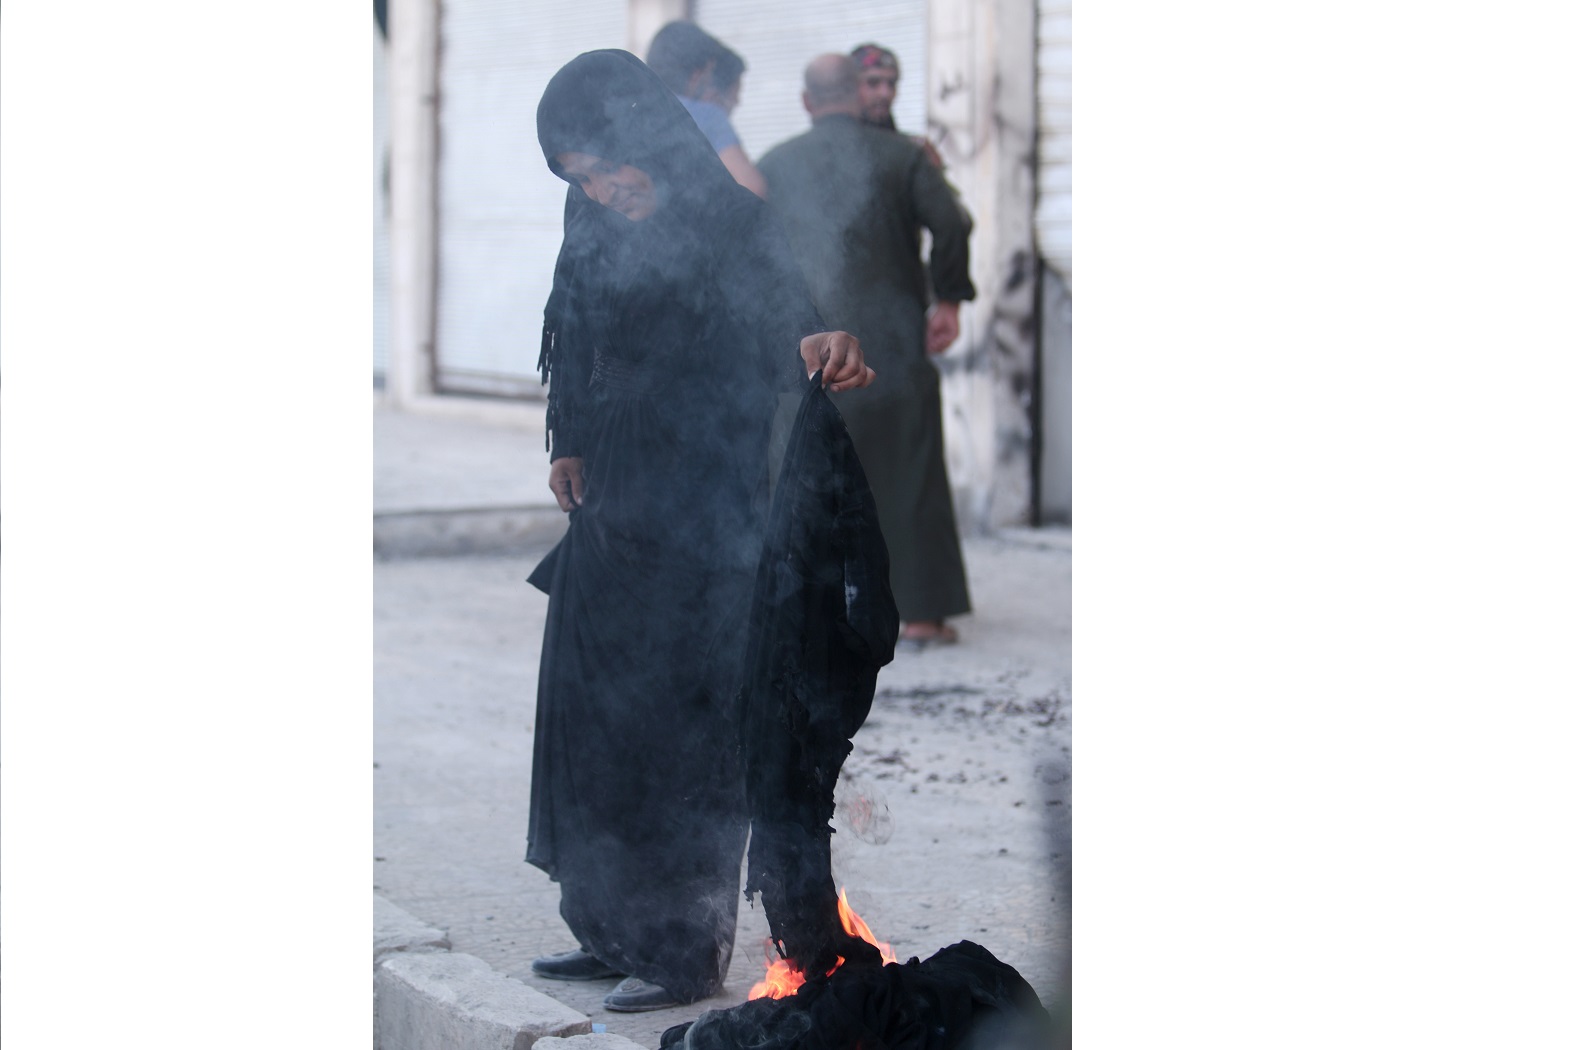 A woman sets fire to a niqab after she was evacuated with others by the Syria Democratic Forces (SDF) fighters from an Islamic State-controlled neighbourhood of Manbij